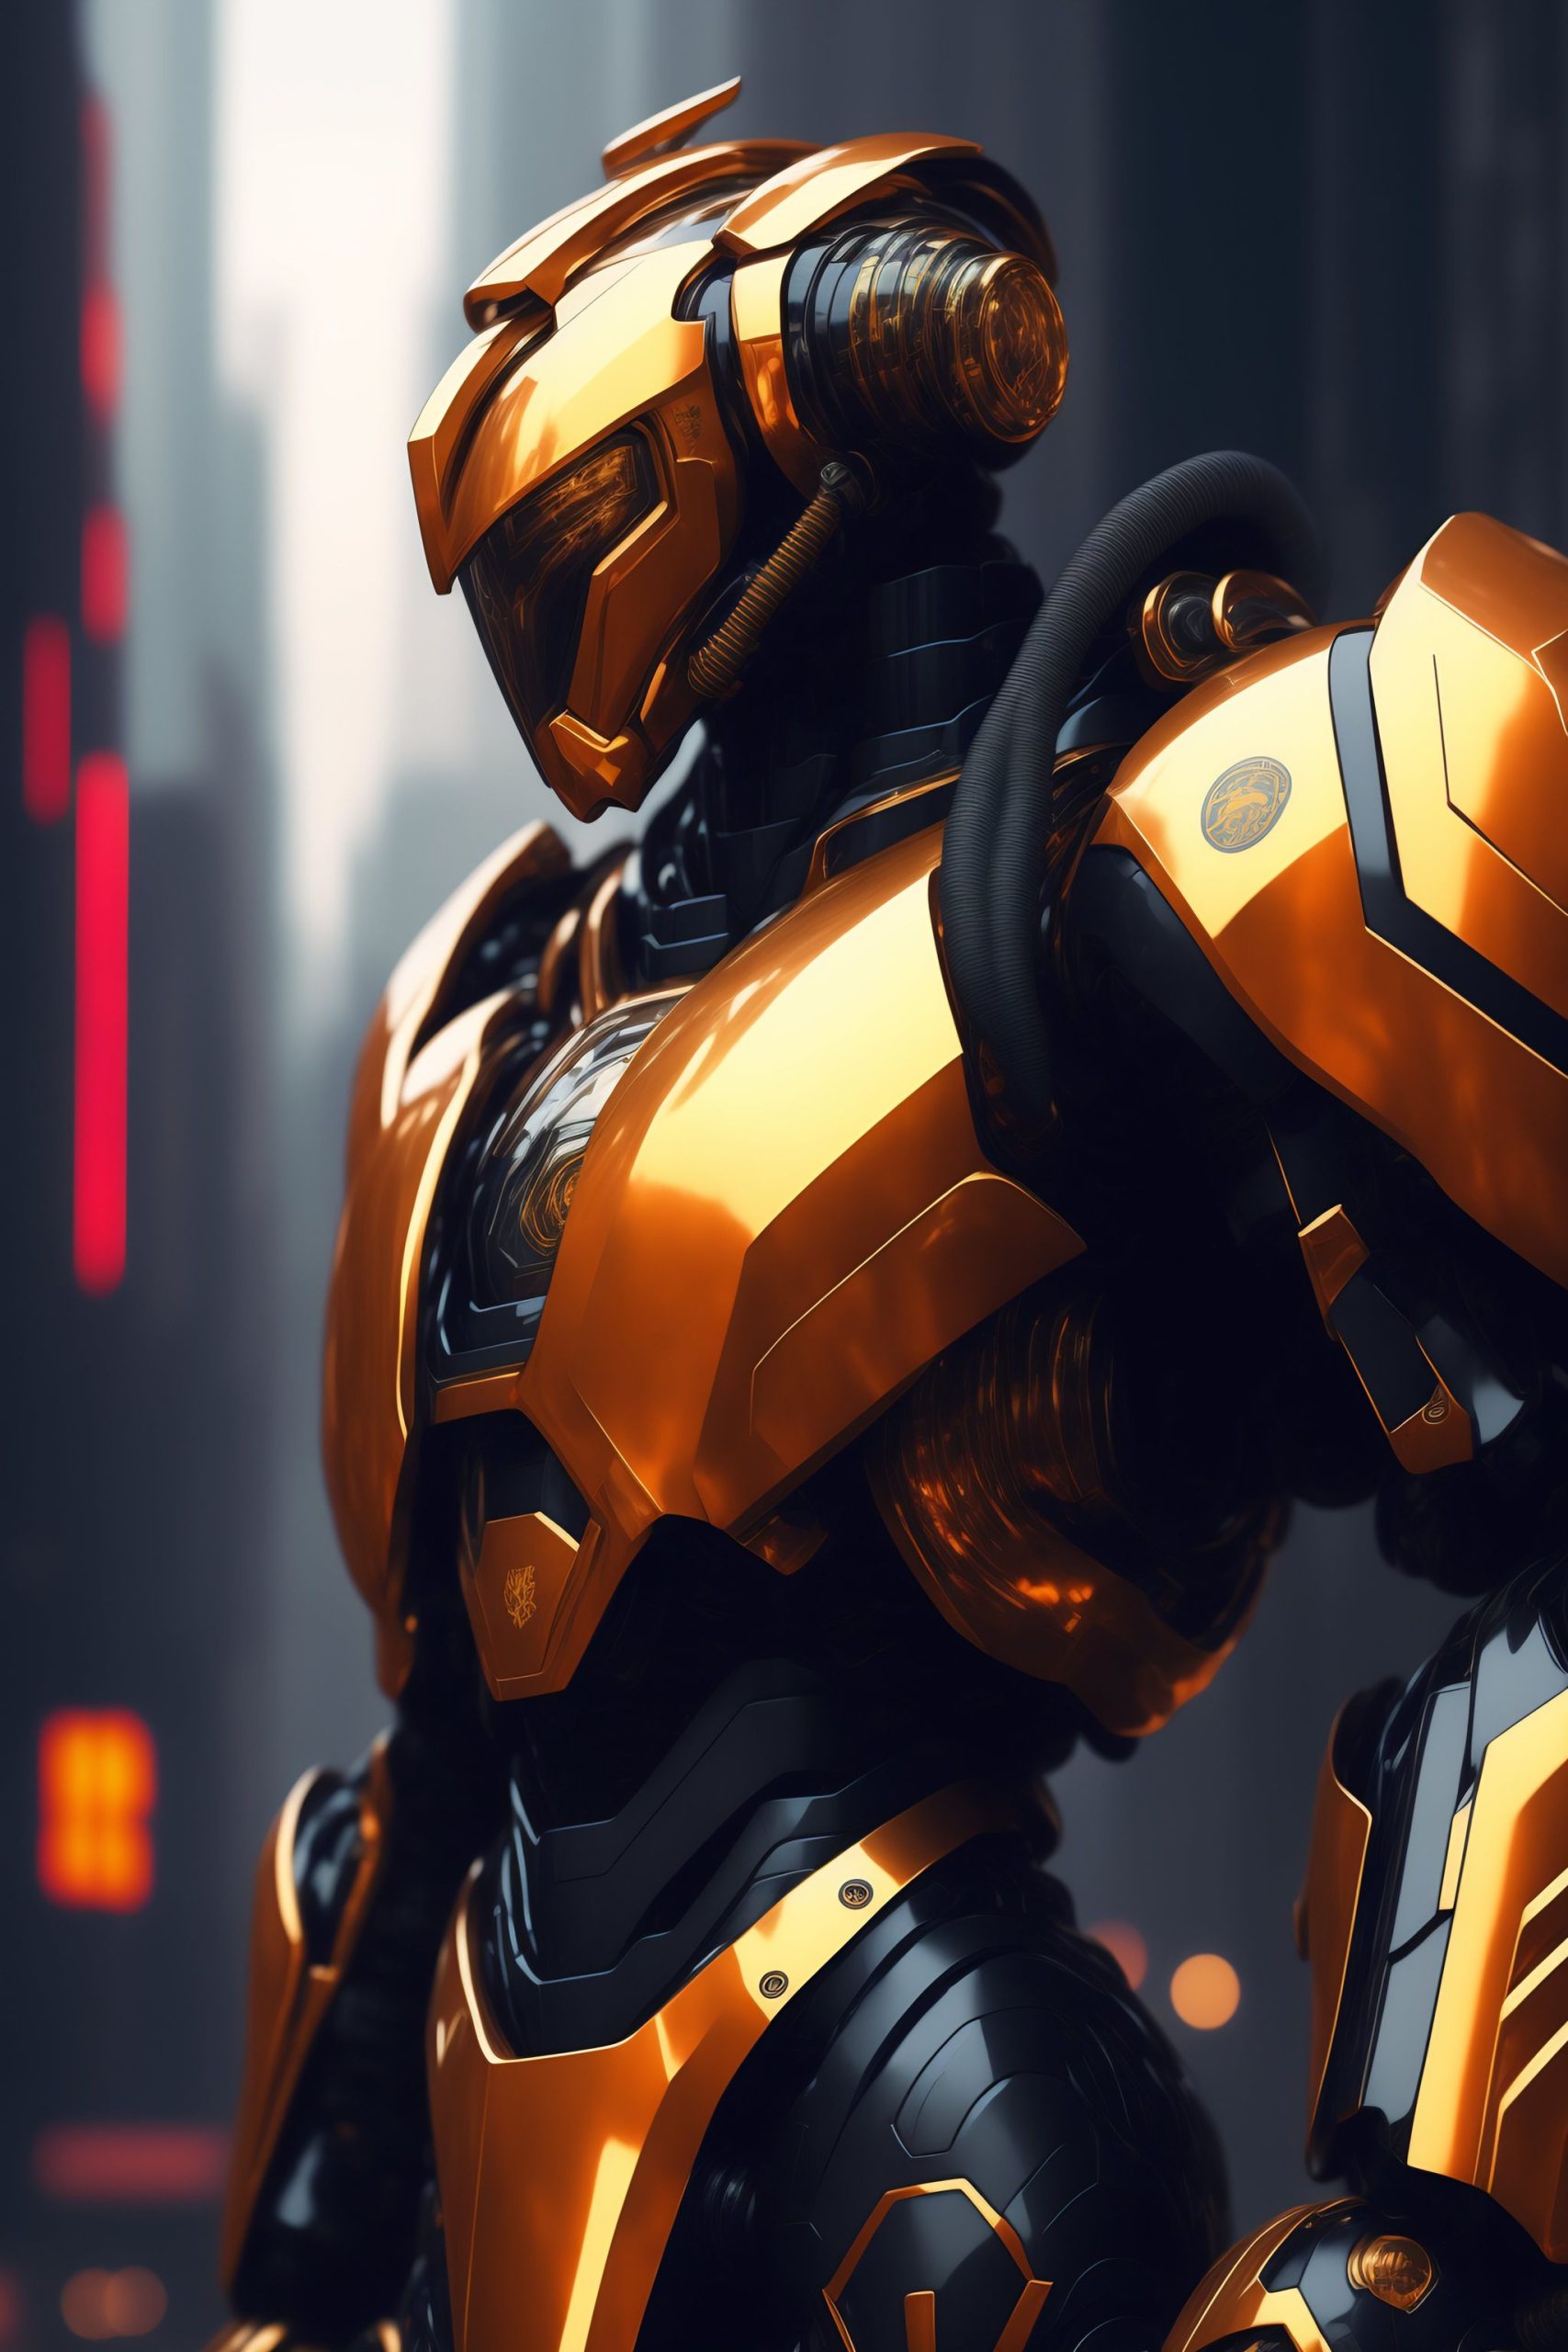 The Beauty and Mastery of Cyberpunk Power Armor in Sci-Fi Concept Art